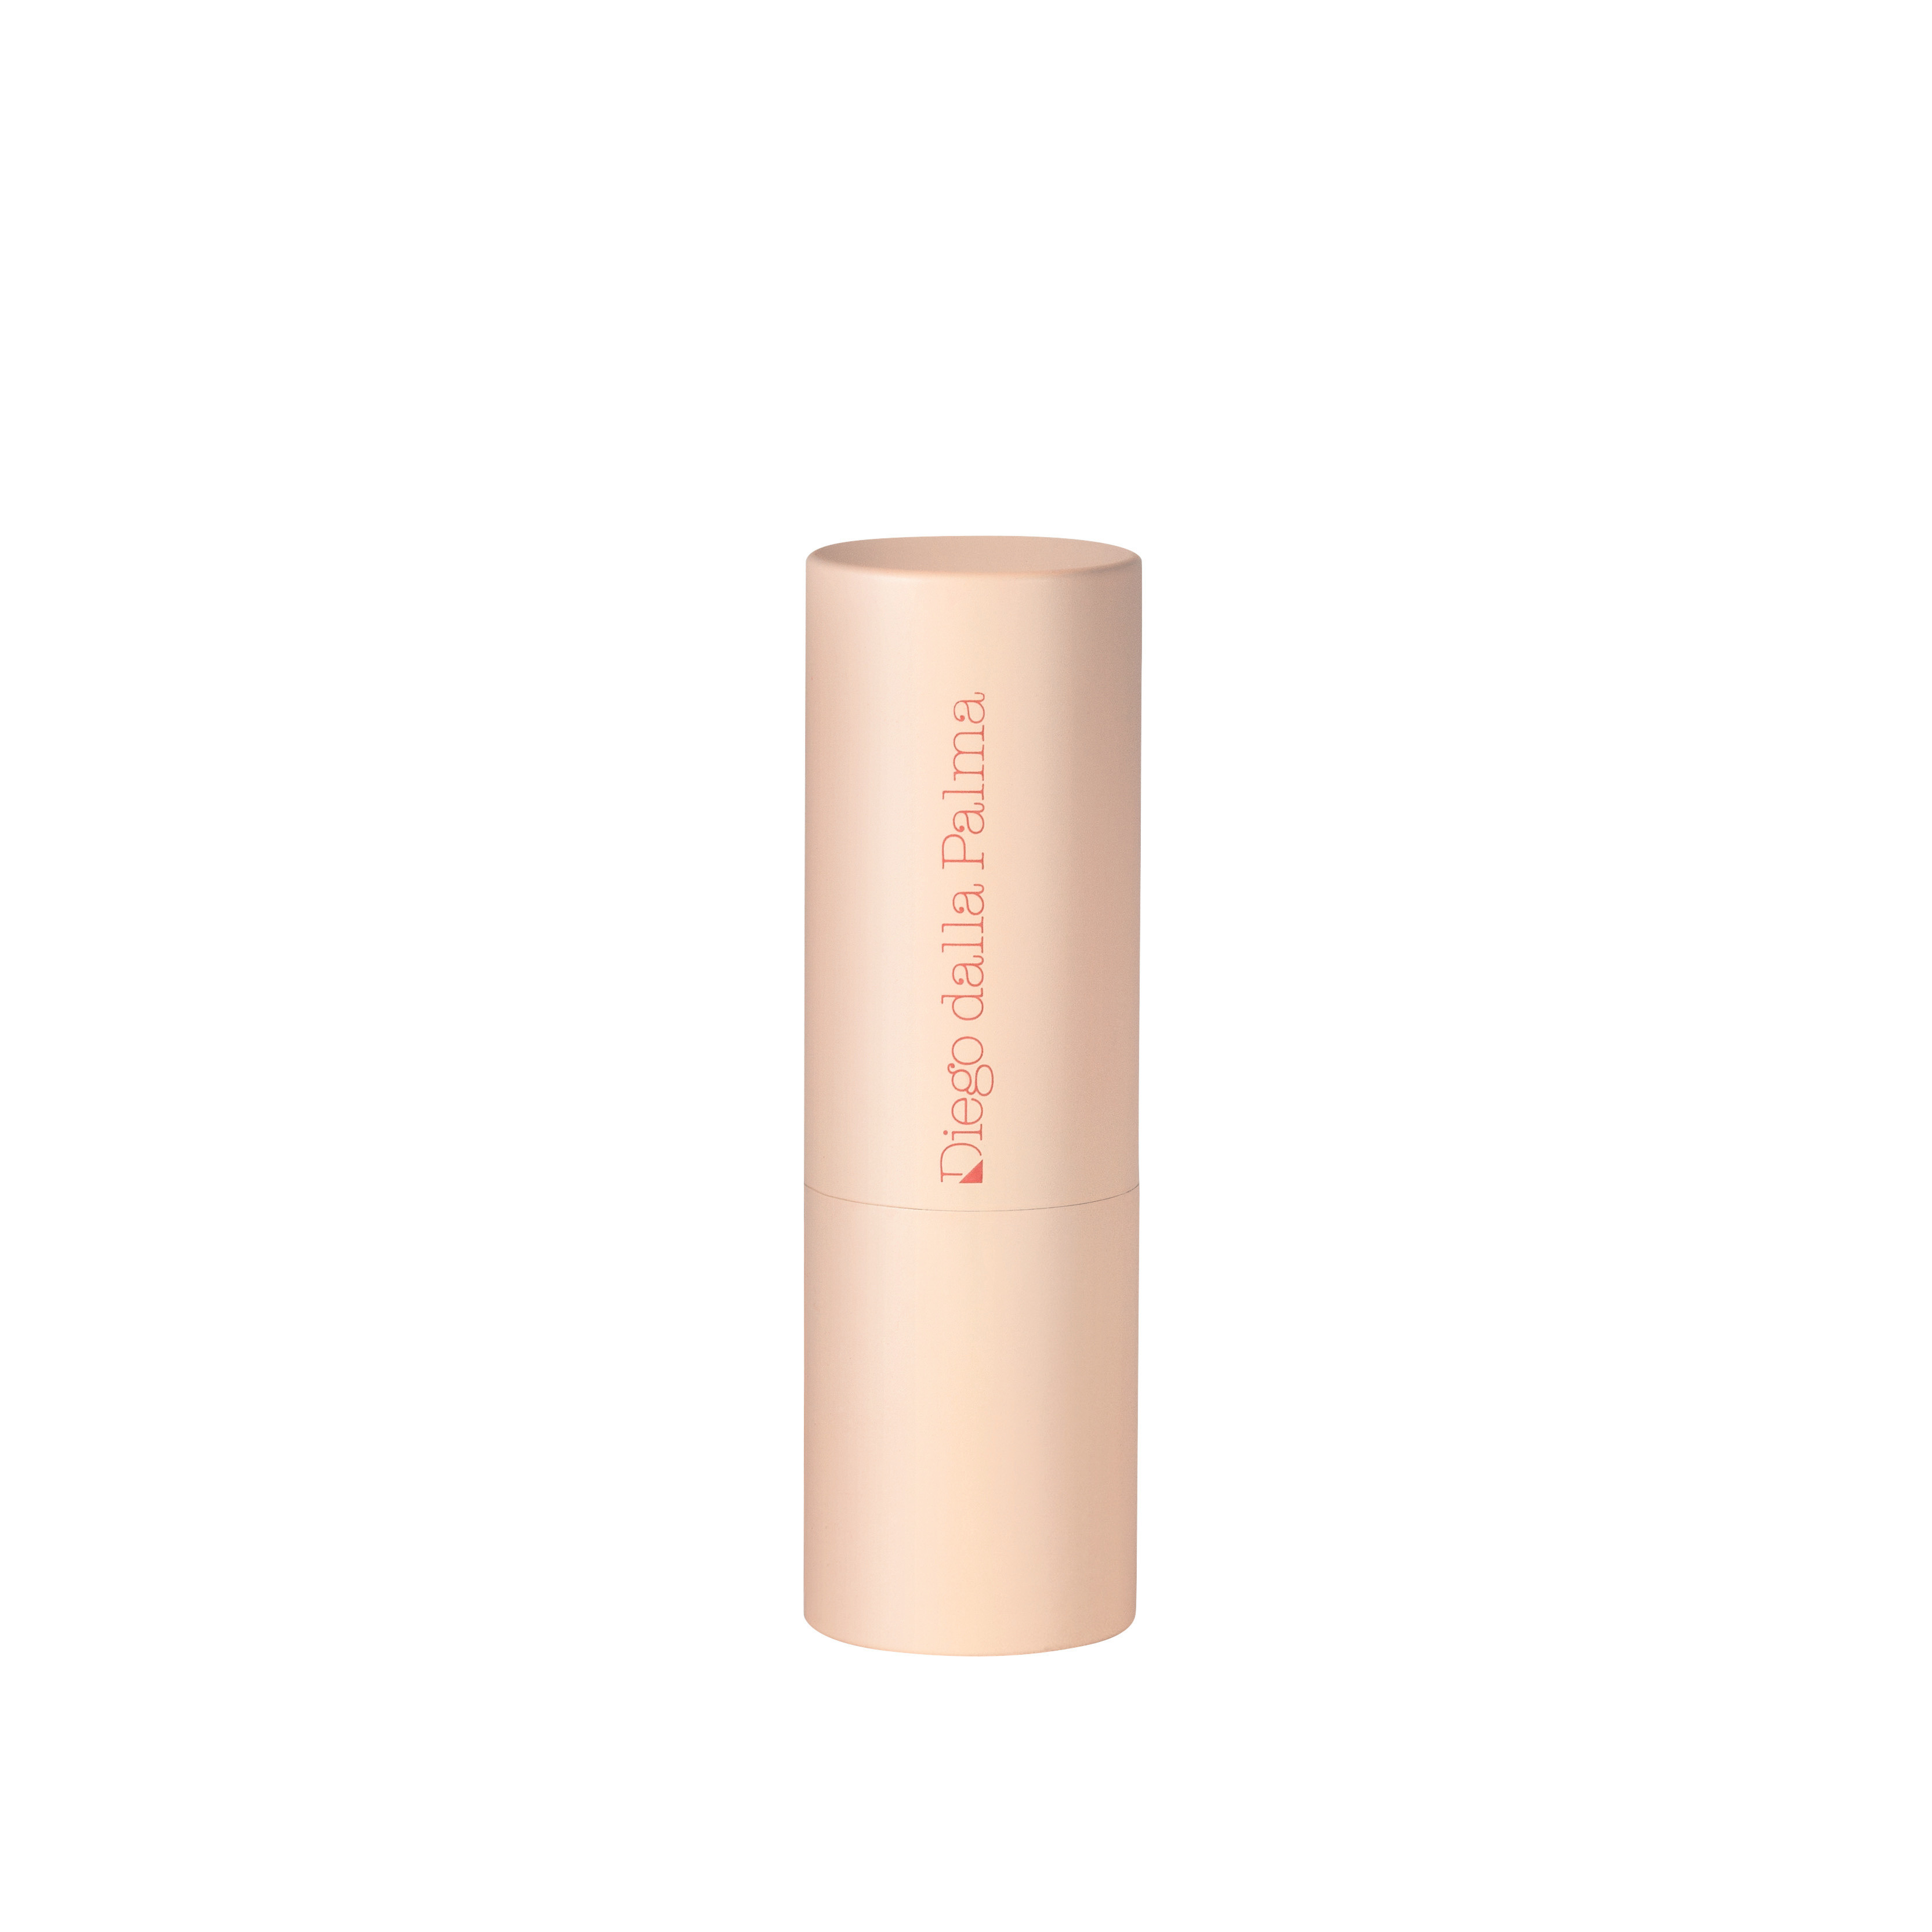 Protect My Lips Protective Lip Balm Spf50+, Coral Red, large image number 1